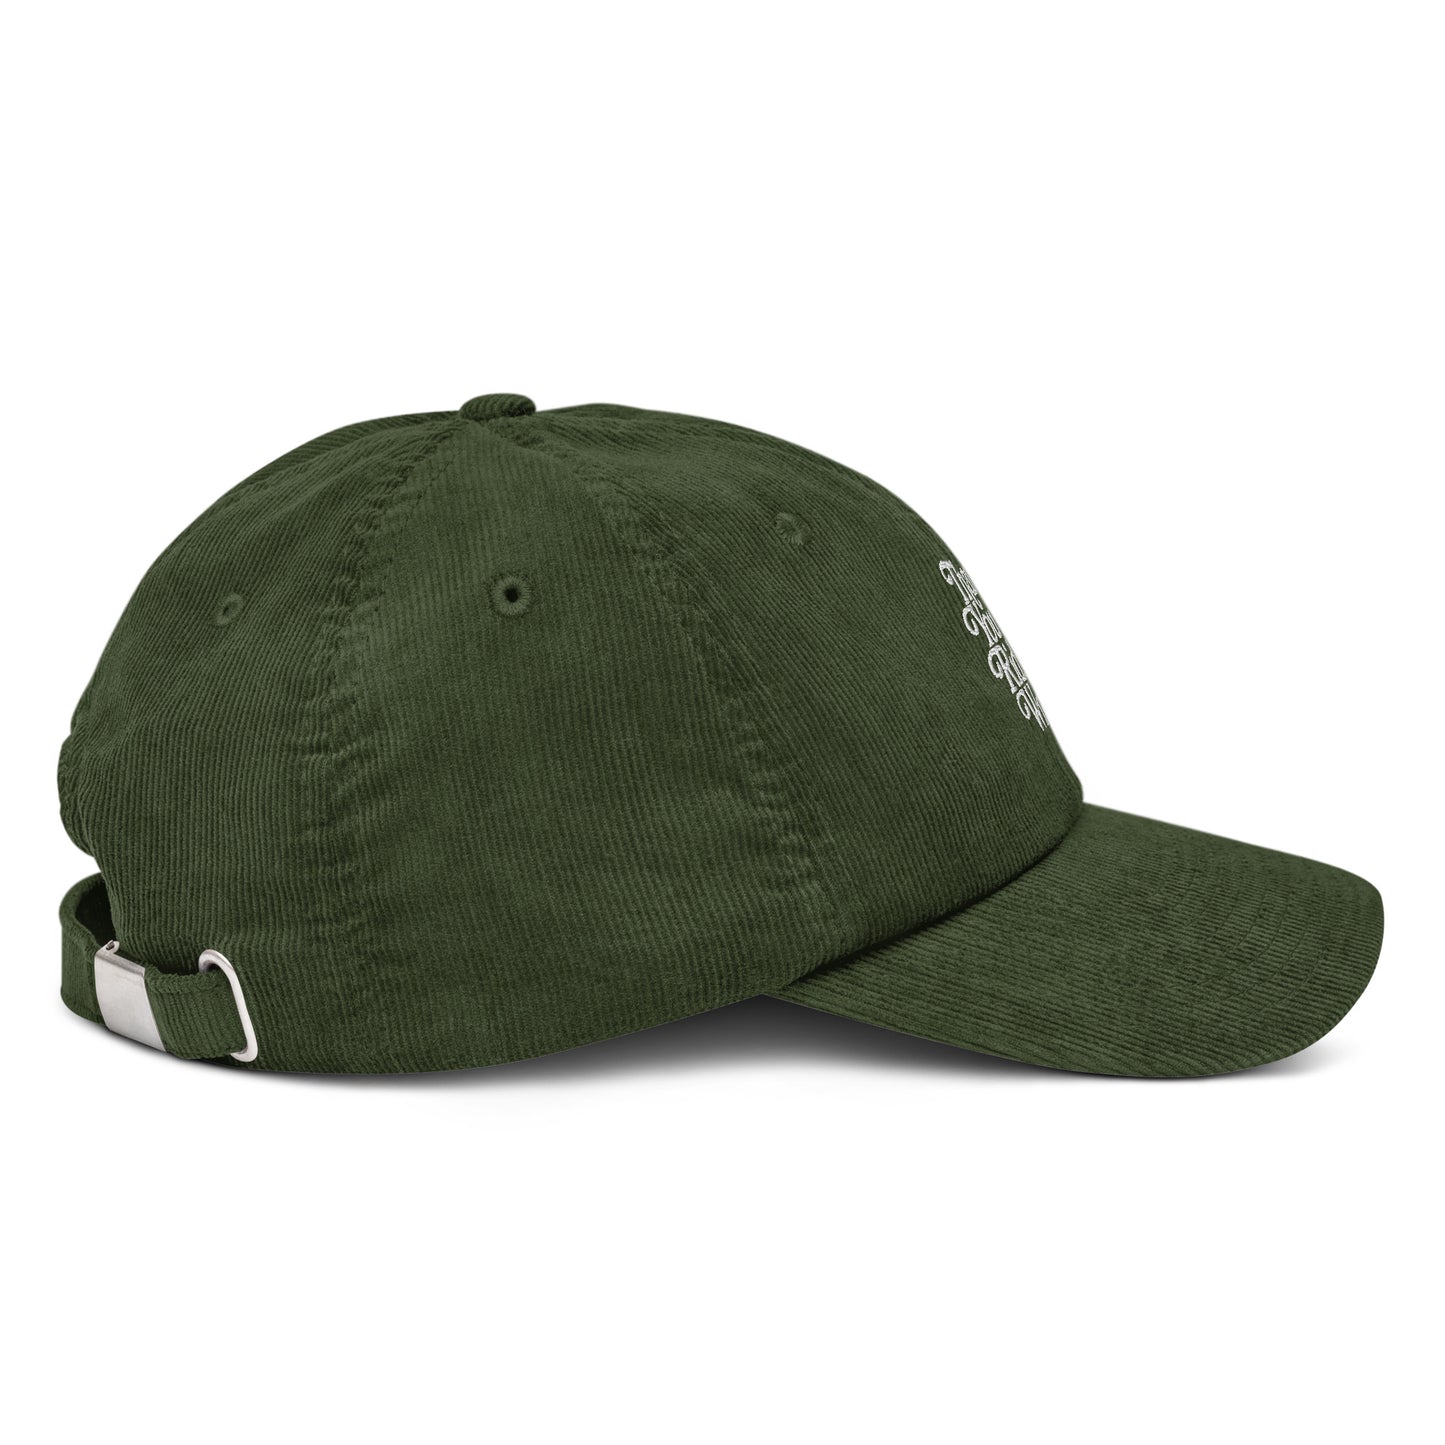 Thank You For Riding With Us! Embroidered Corduroy Cap Green